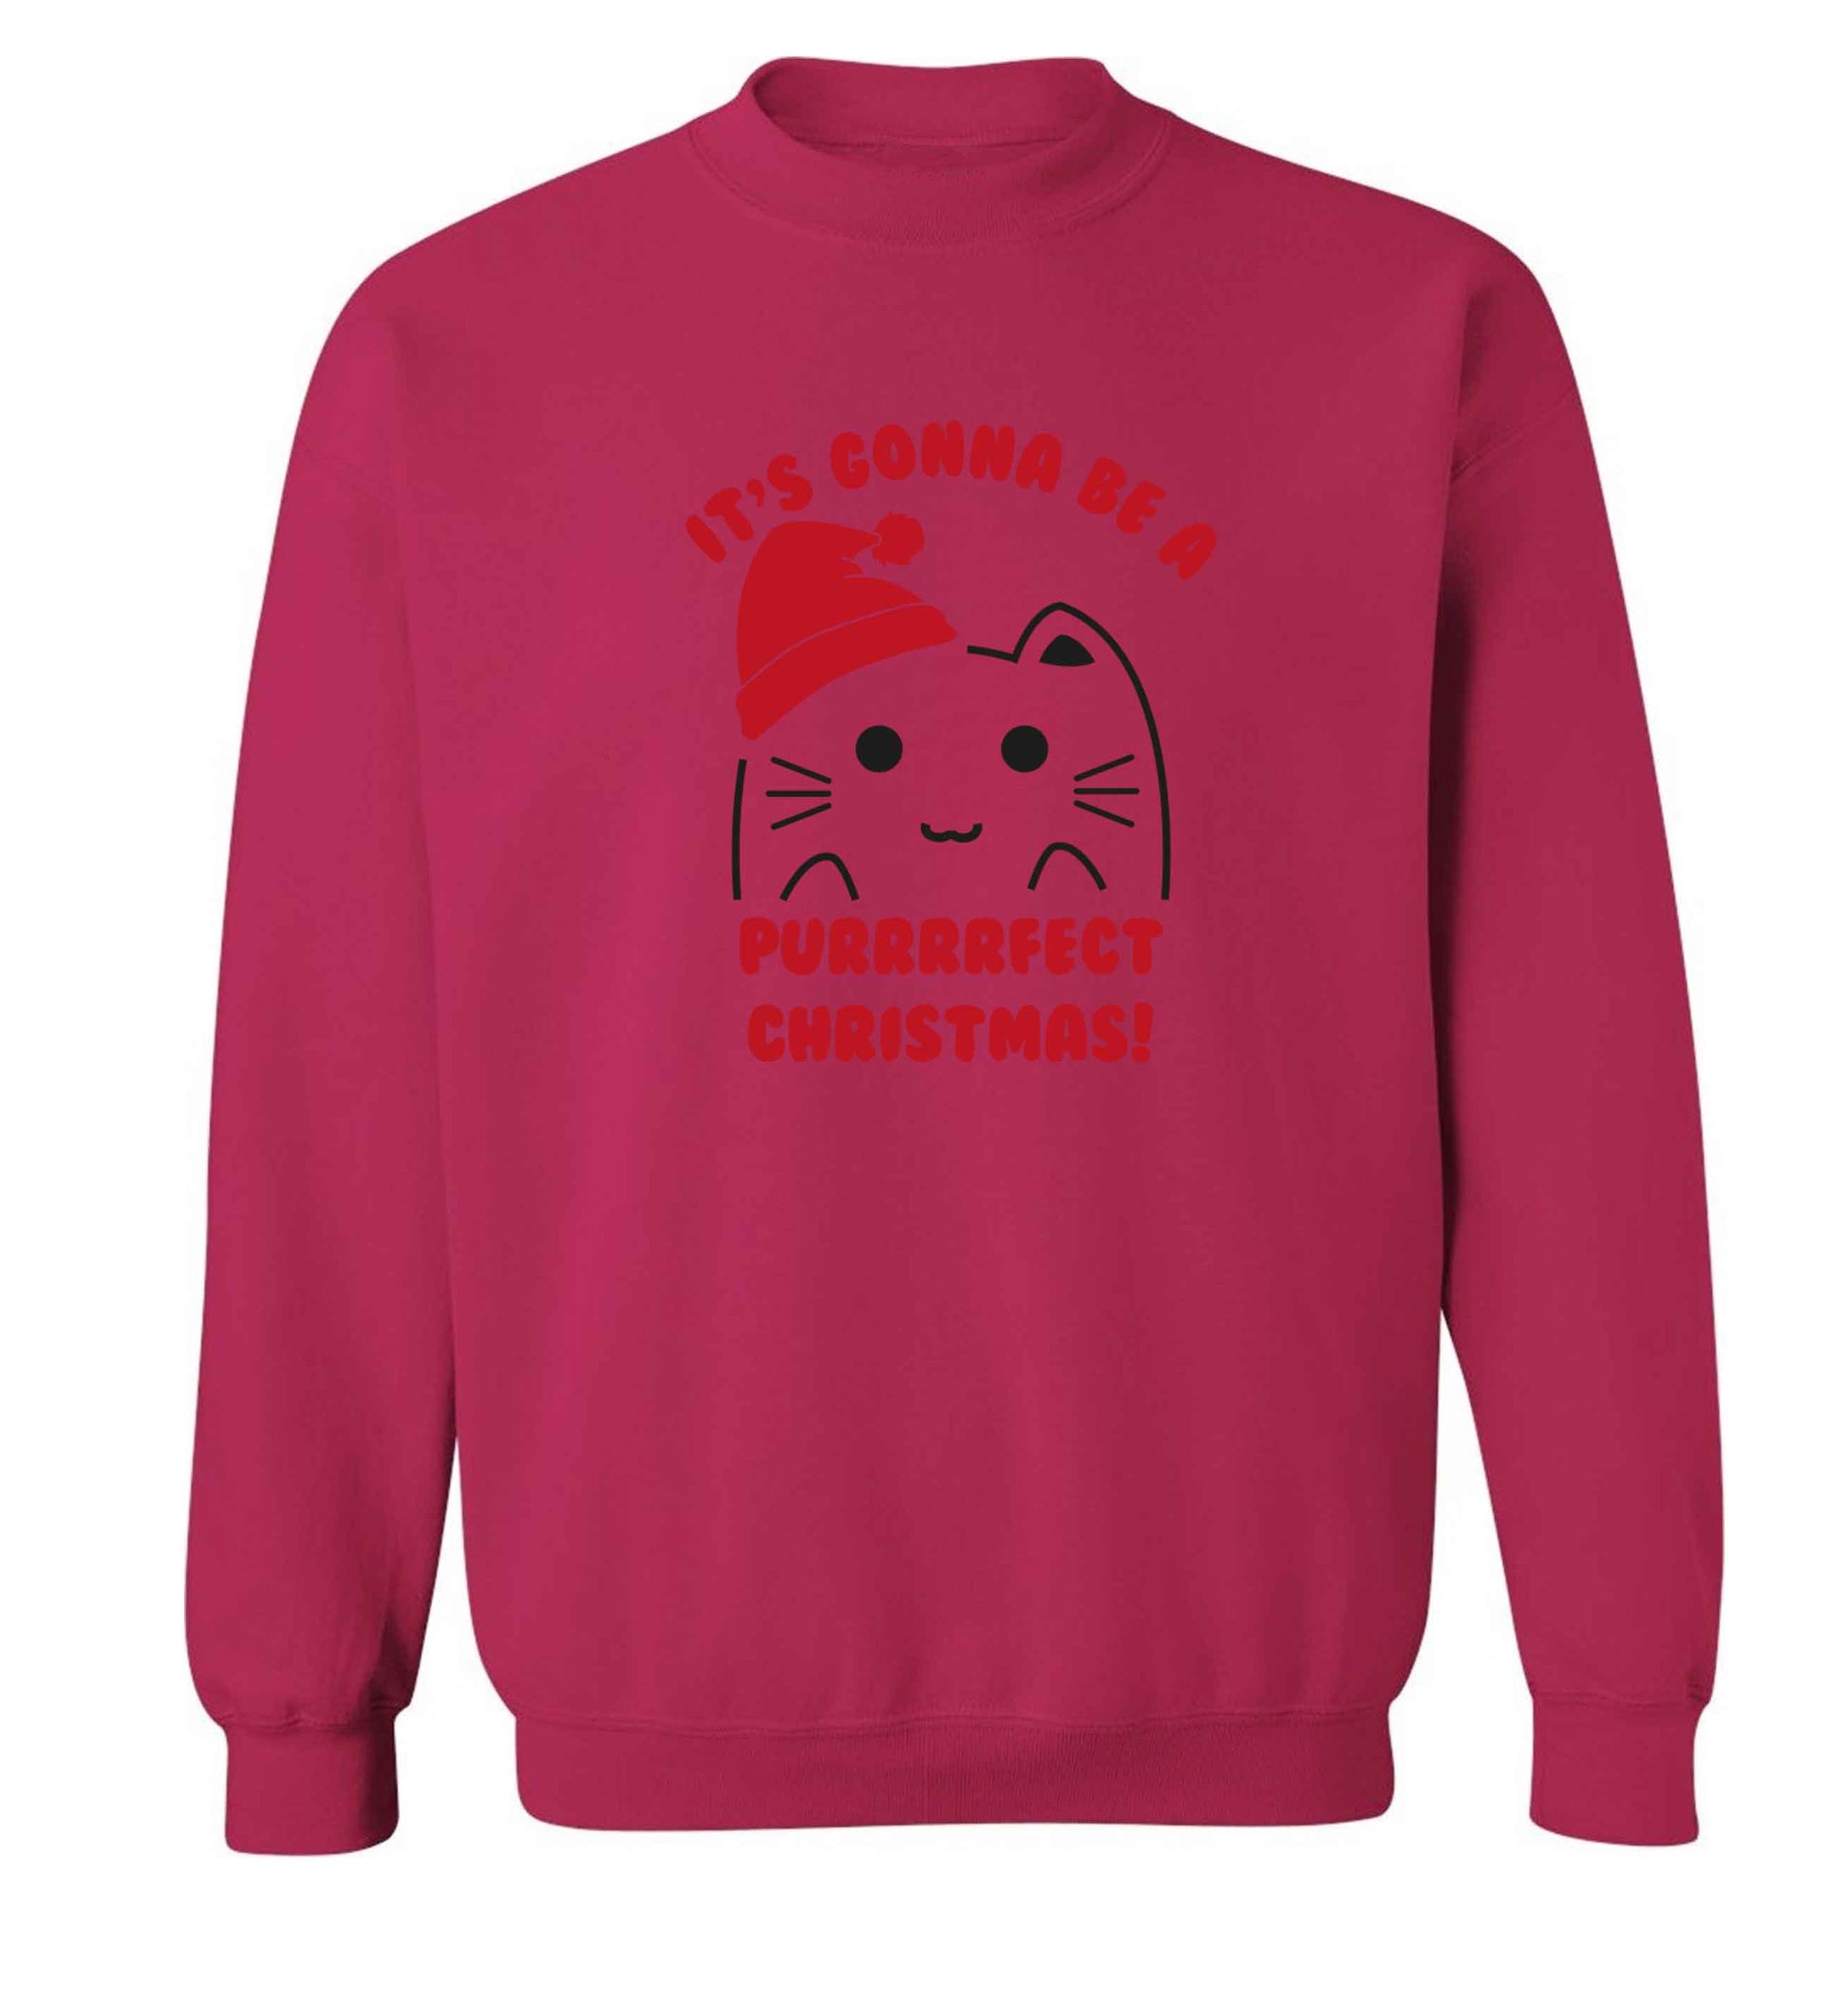 It's going to be a purrfect Christmas adult's unisex pink sweater 2XL